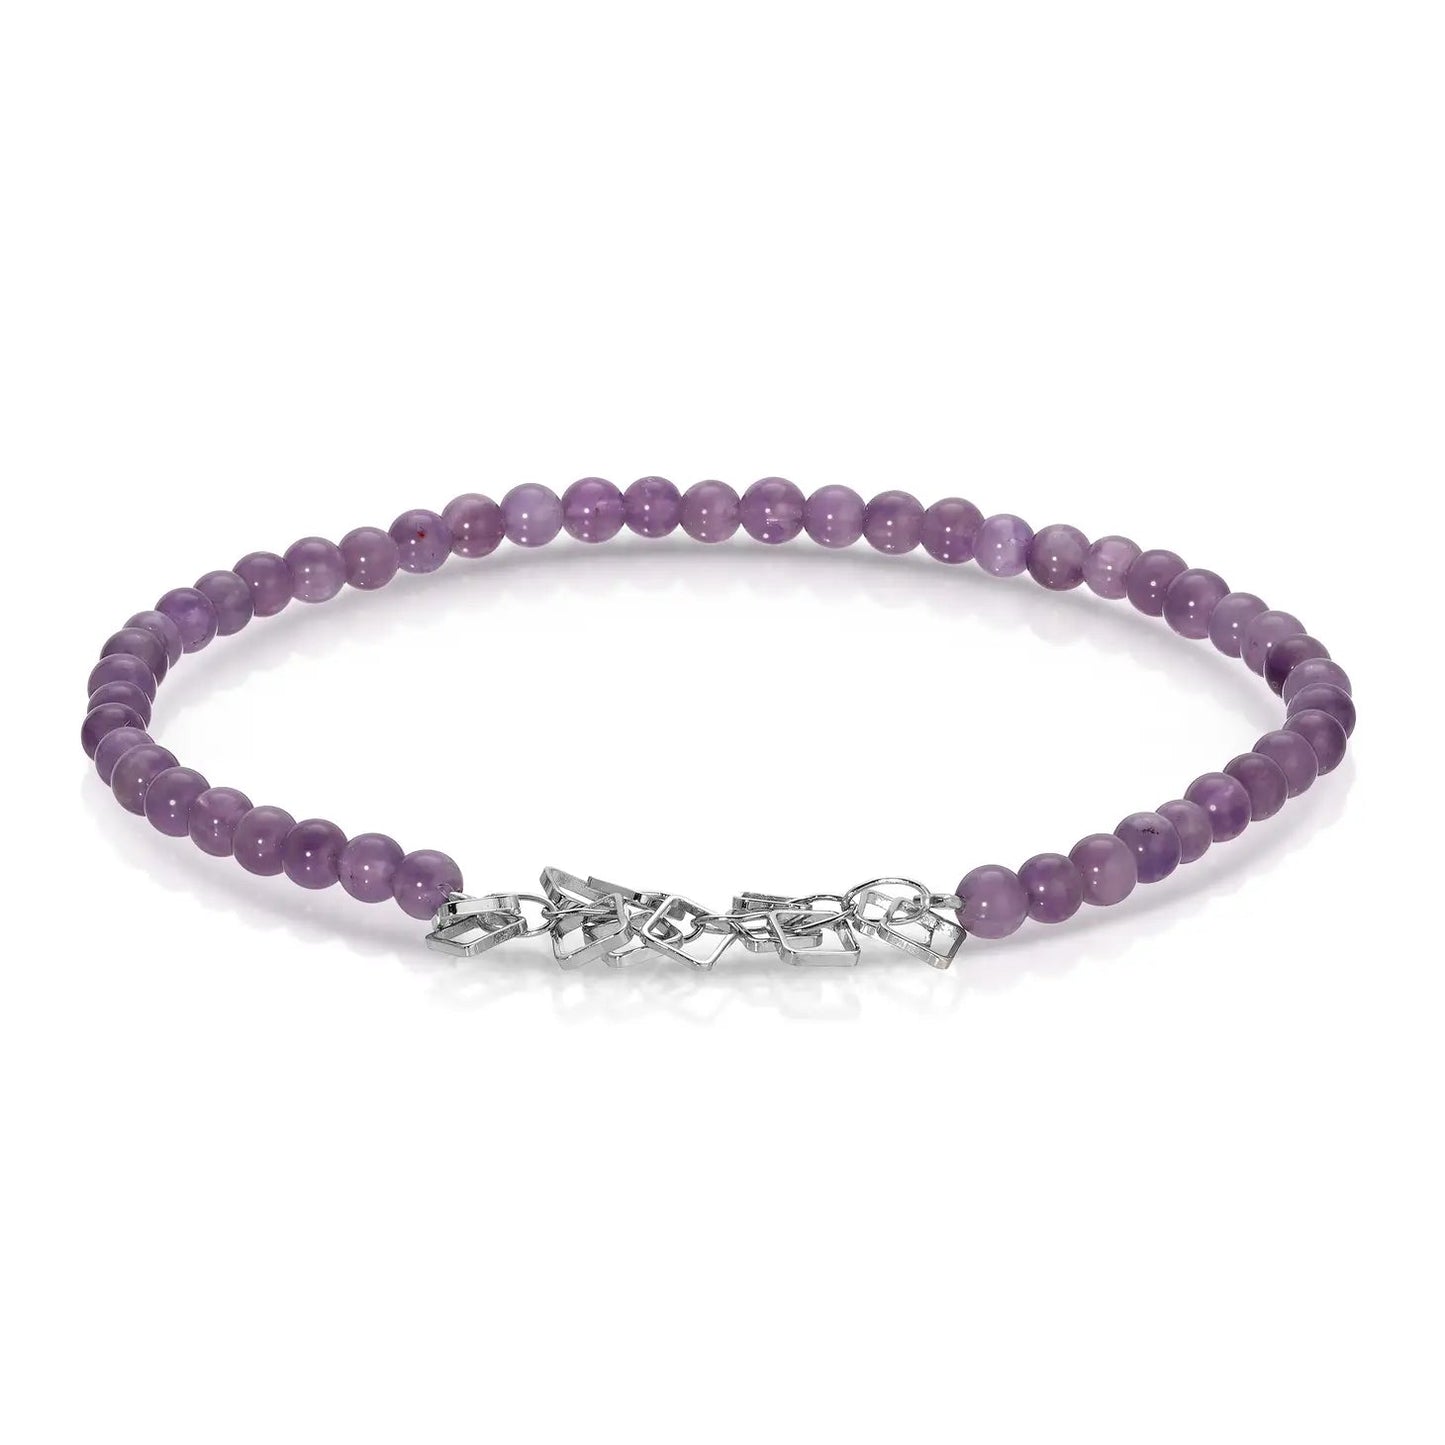 Ankle Bracelet - Amethyst Mini Gemstone - AK1214MS - The Hare and the Moon